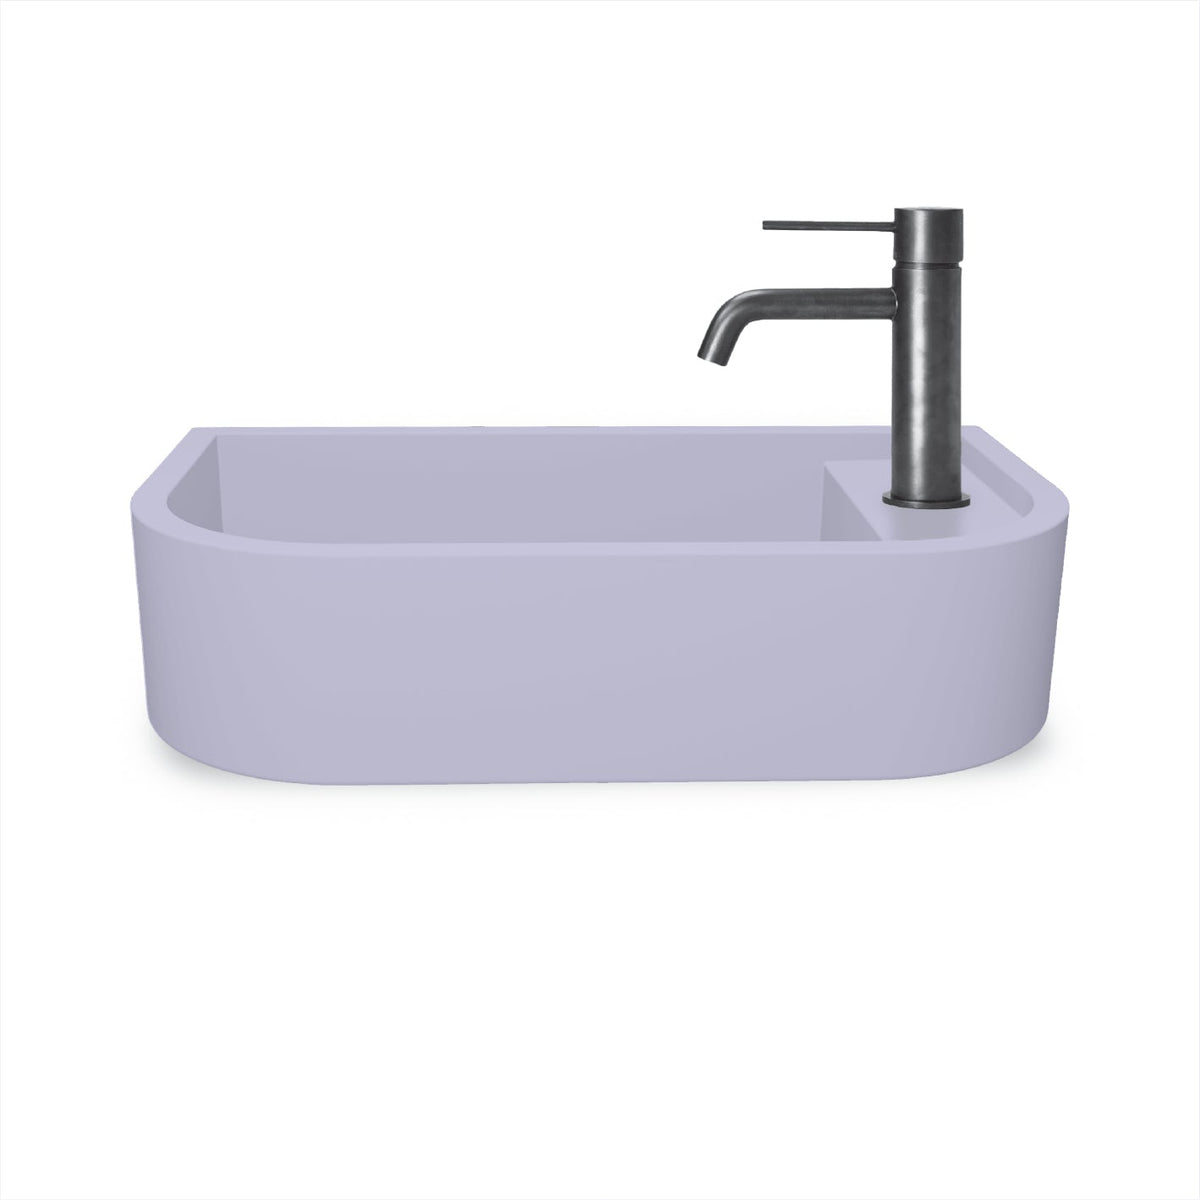 Loop 02 Basin - Overflow - Surface Mount (Lilac,Tap Hole,White)